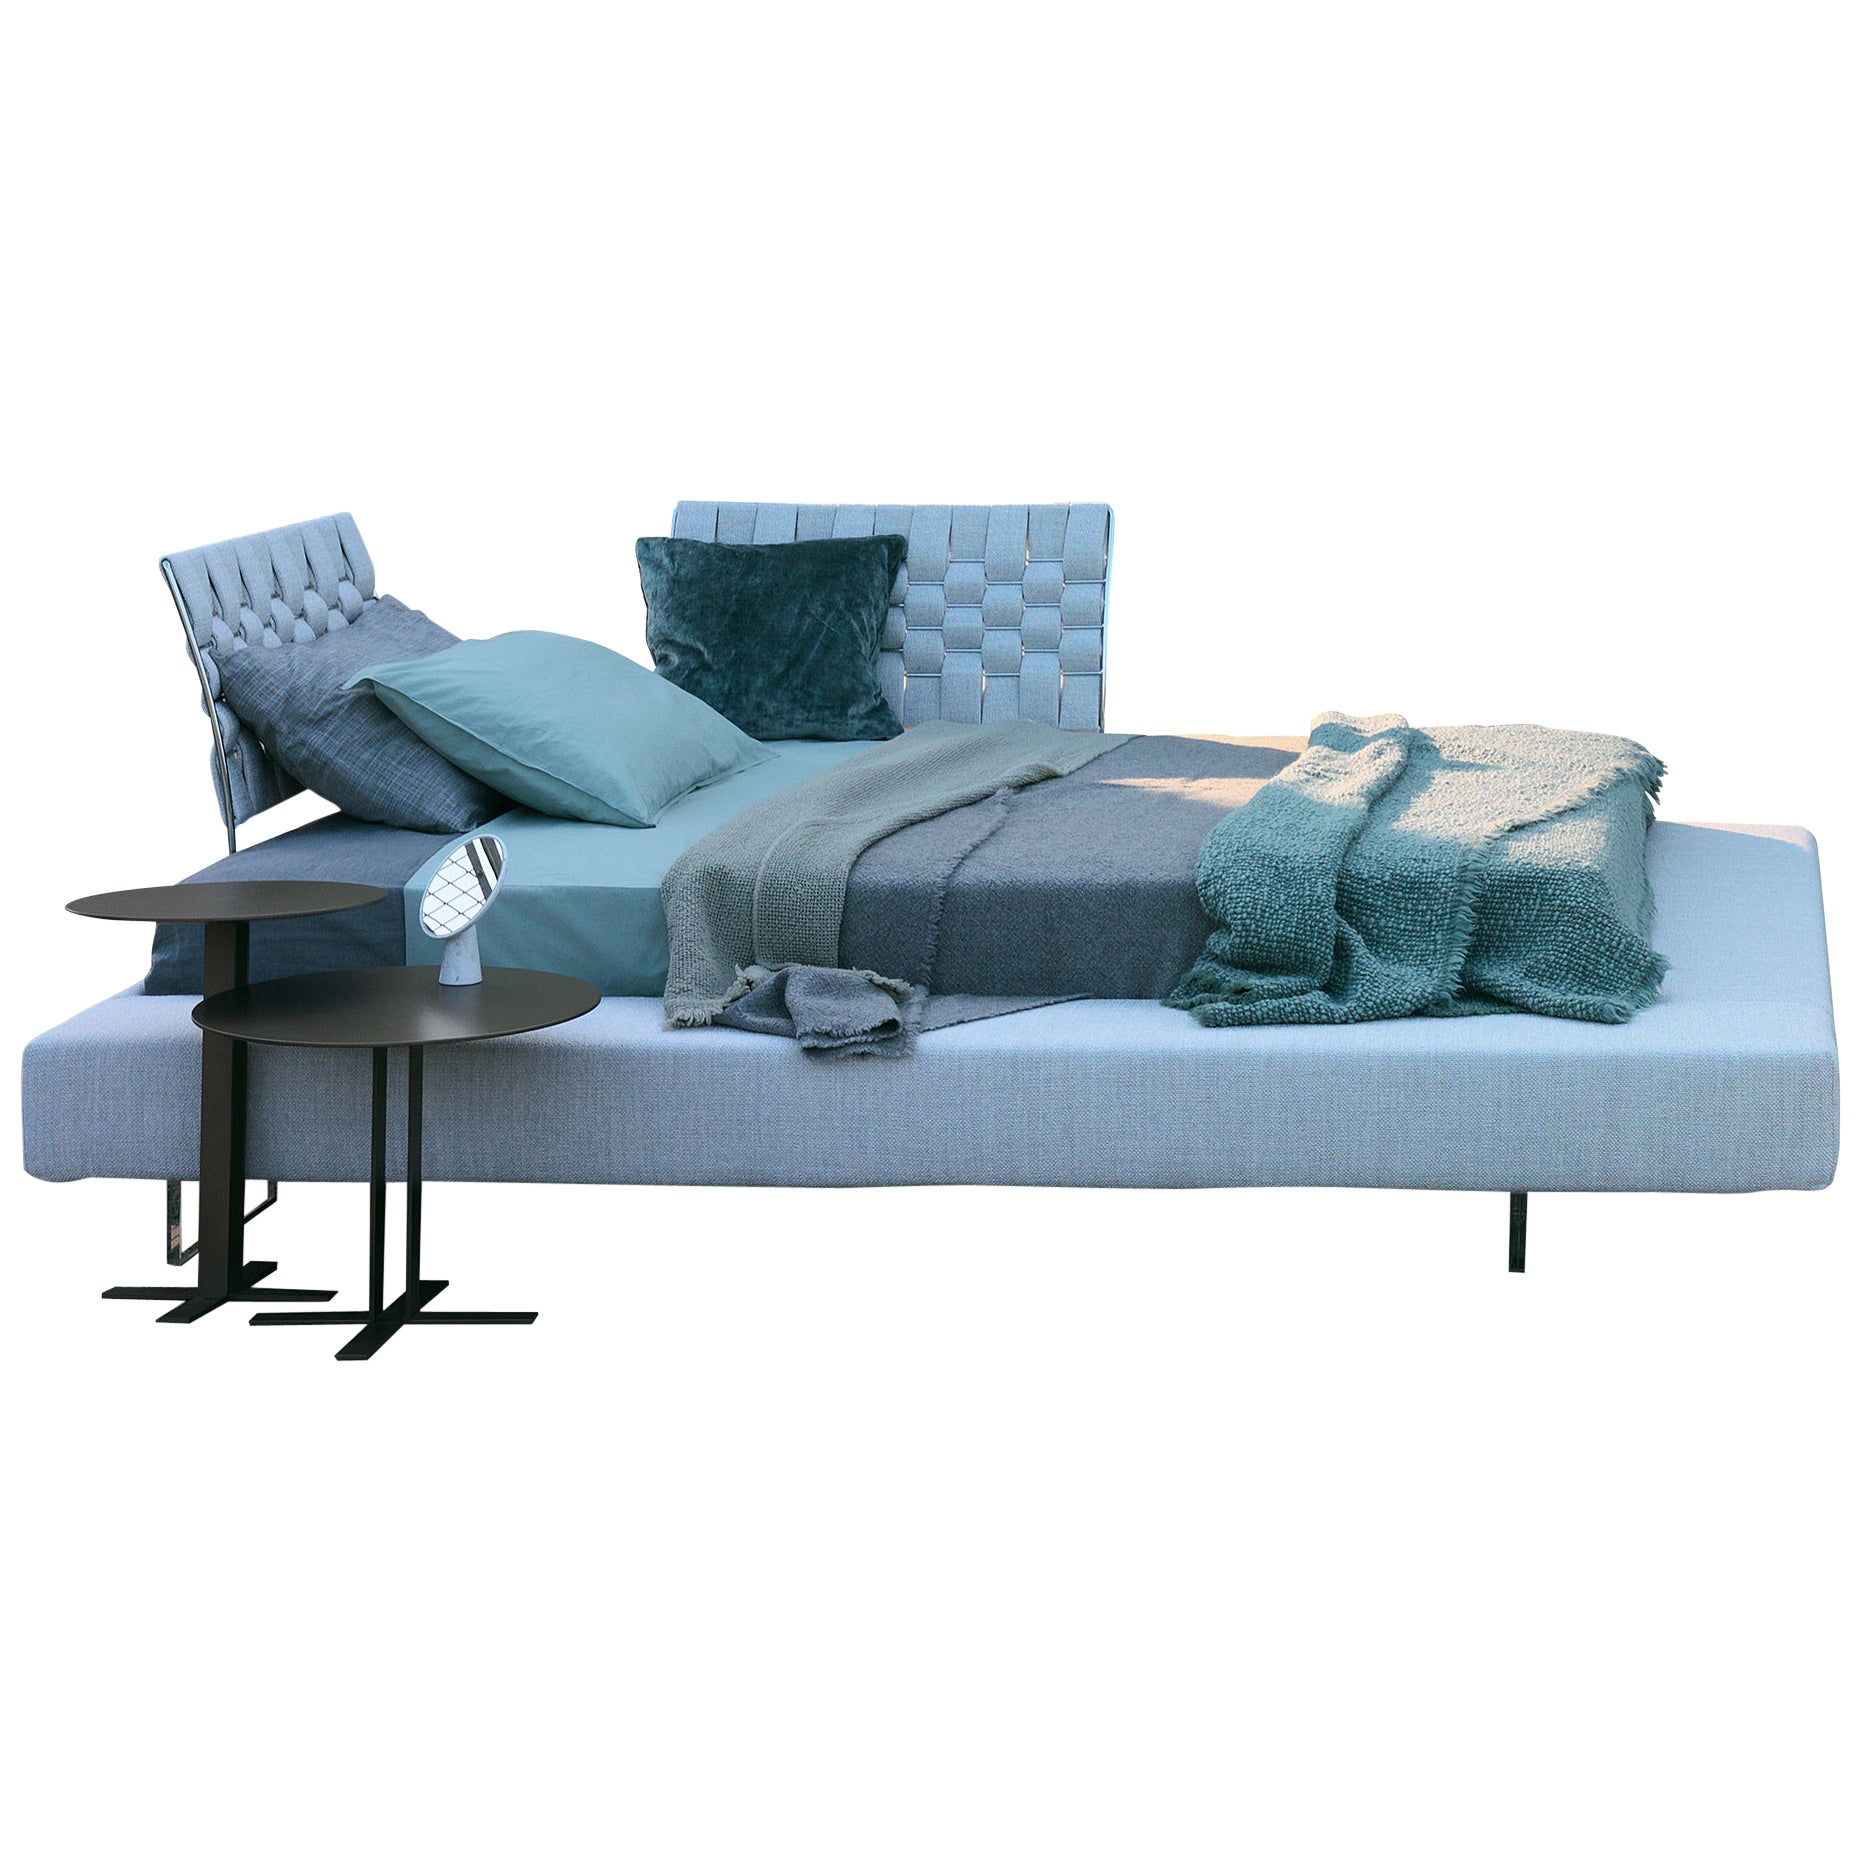 Letto Limes Large Bed in Blue Avant Après with Padded Bands, Queen Size  For Sale